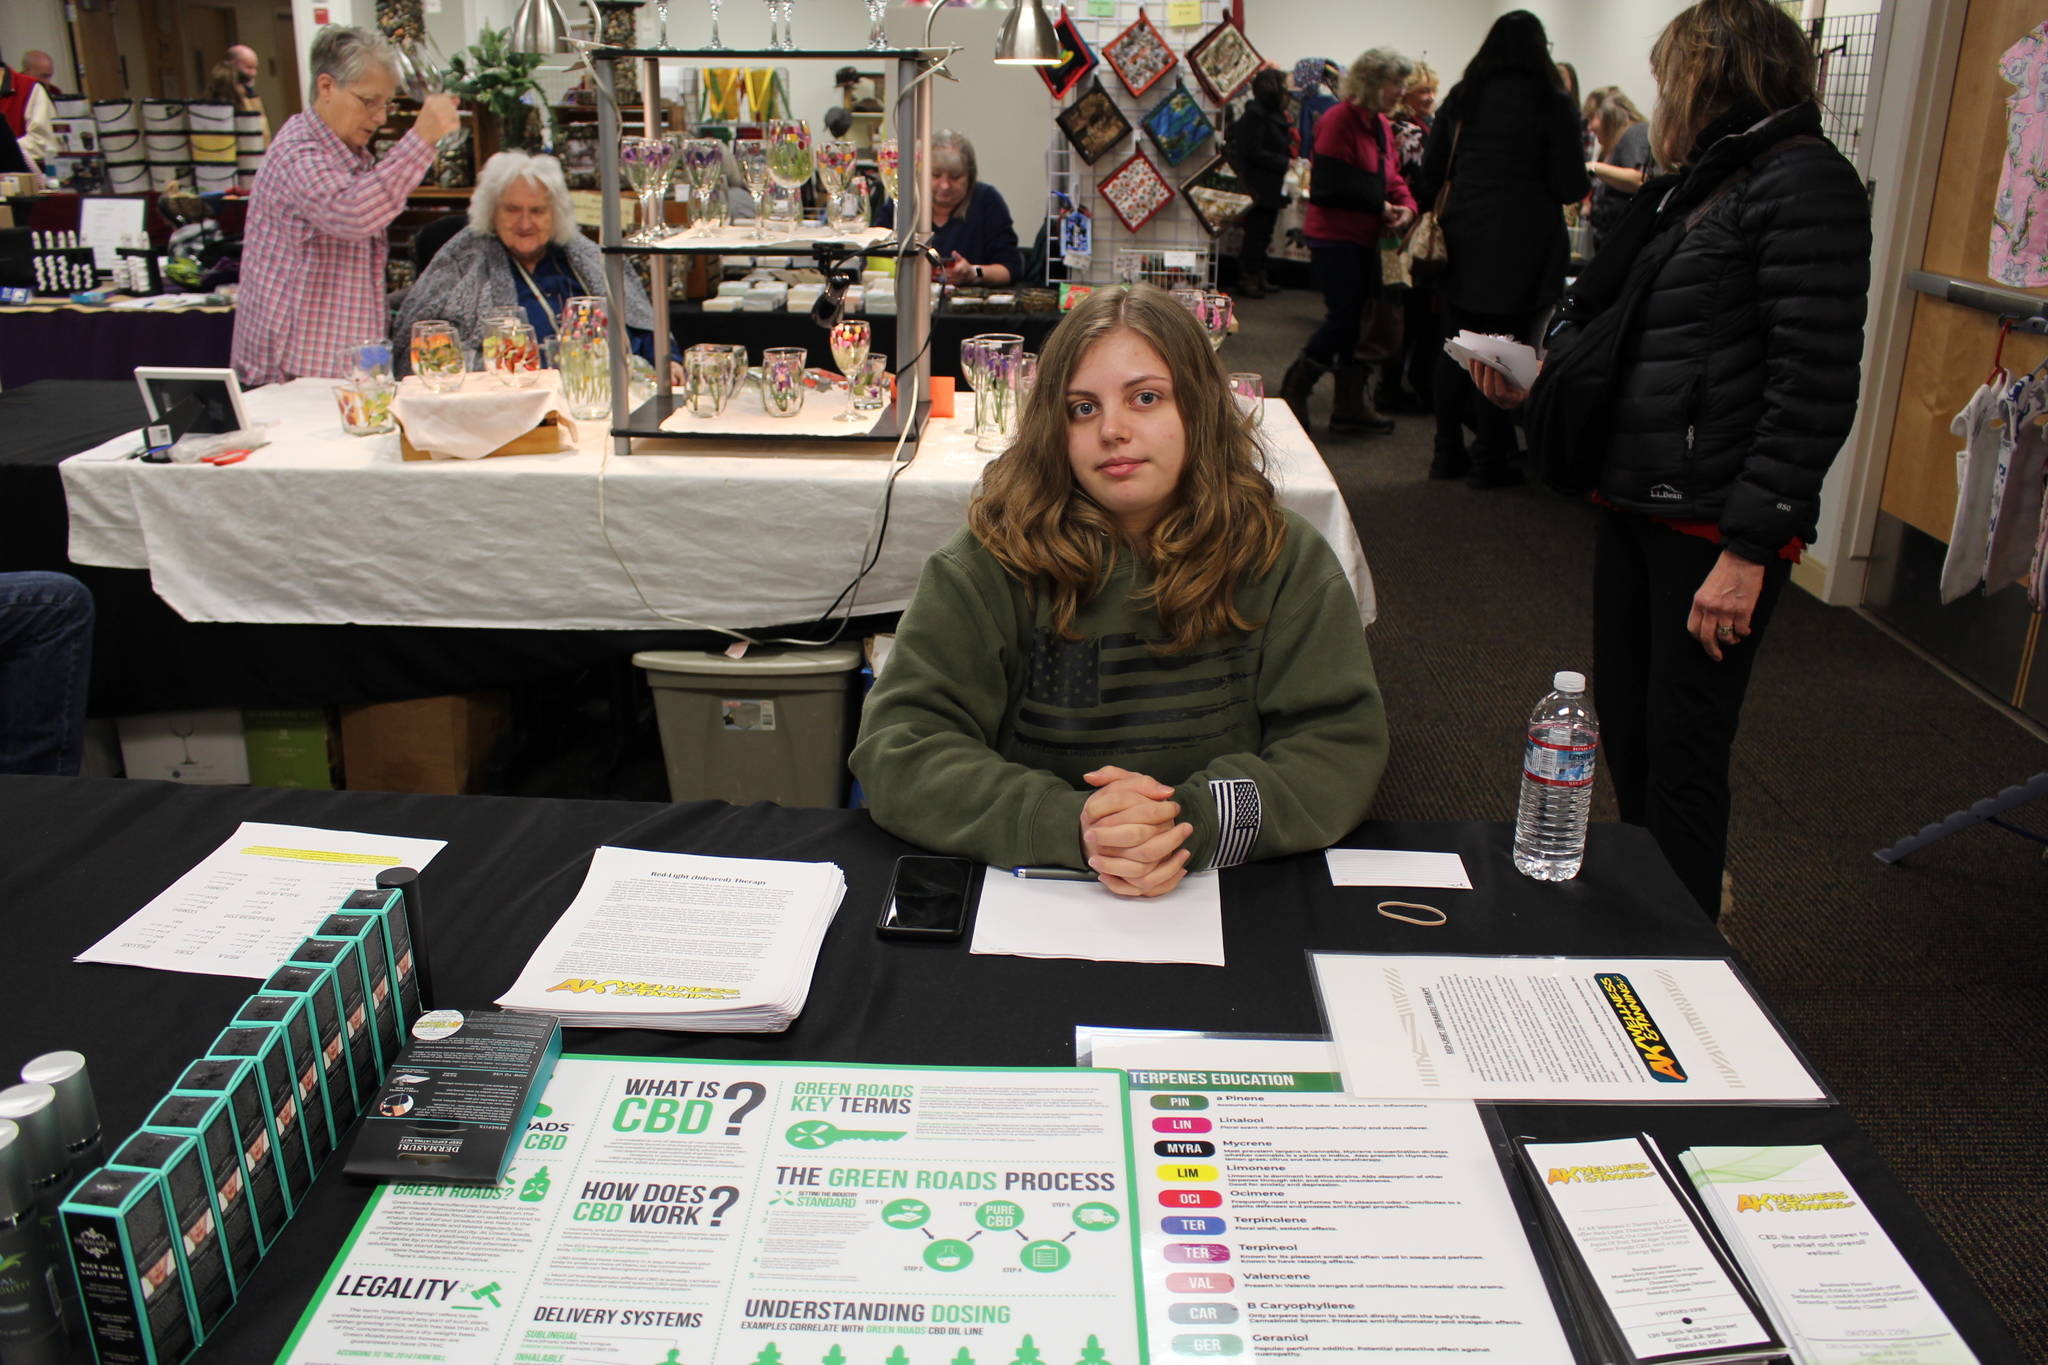 Vanessa Uie, owner of AK Wellness and Planning, displays some of her CBD products for sale at the annual Central Peninsula Hospital Auxiliary Holiday Bazaar in Soldotna, Alaska on Dec. 6, 2019. (Photo by Brian Mazurek/Peninsula Clarion)